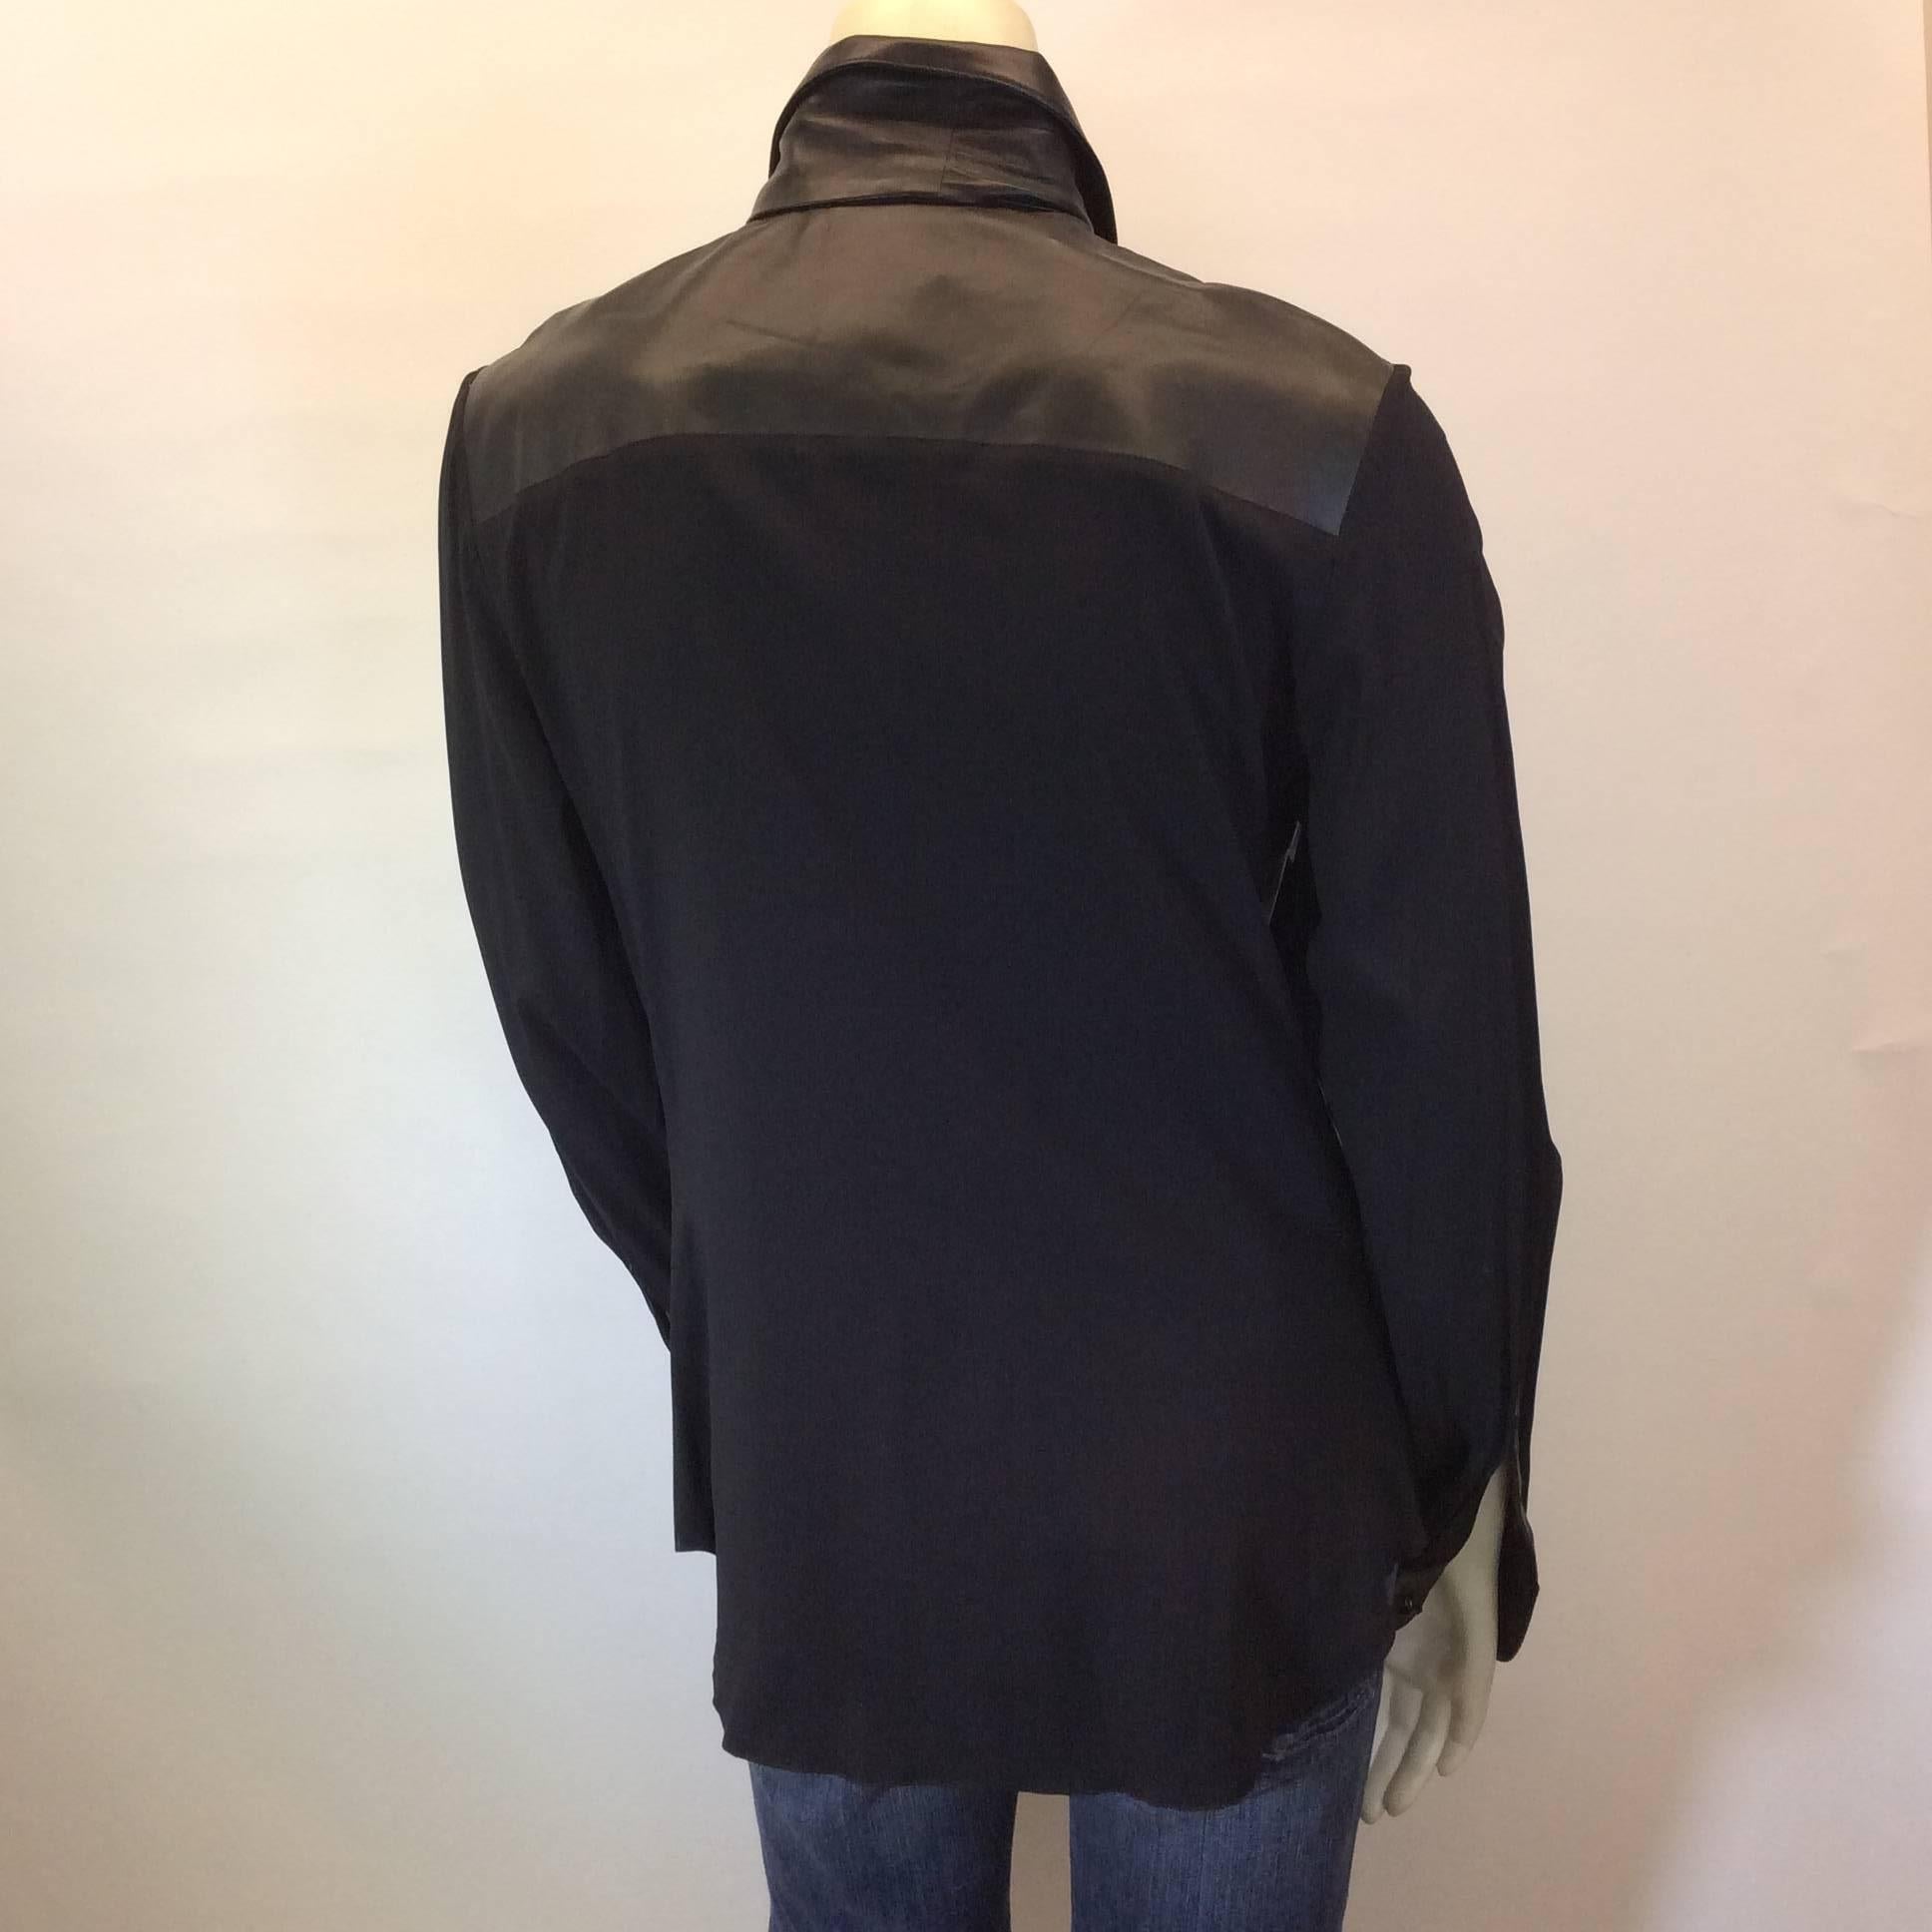 Women's Anna Molinari Black Leather Blouse with Neck Tie For Sale